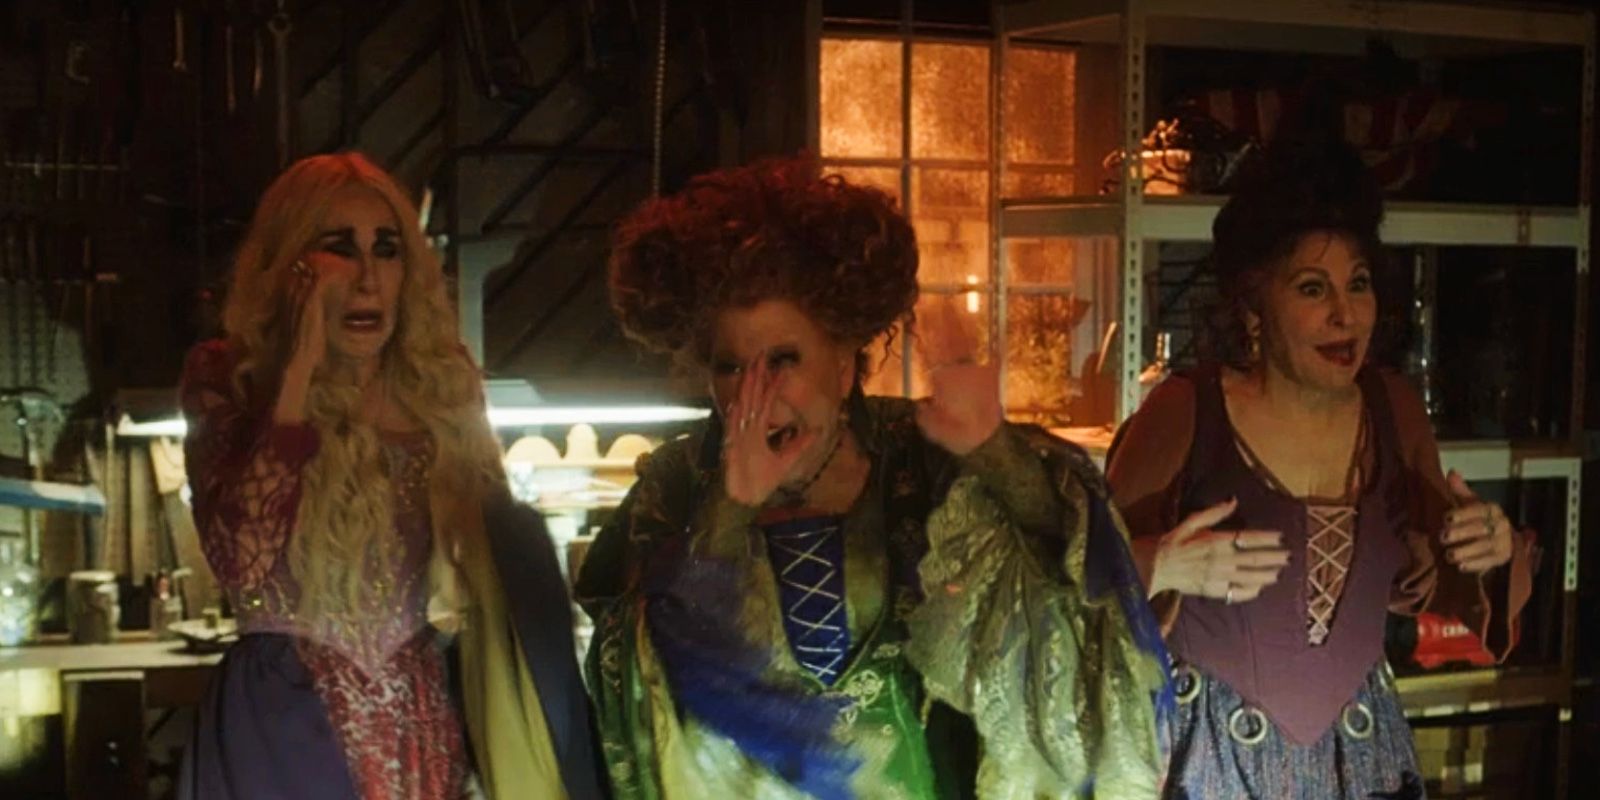 The Sanderson Sisters are hit by the "sun" in Hocus Pocus 2